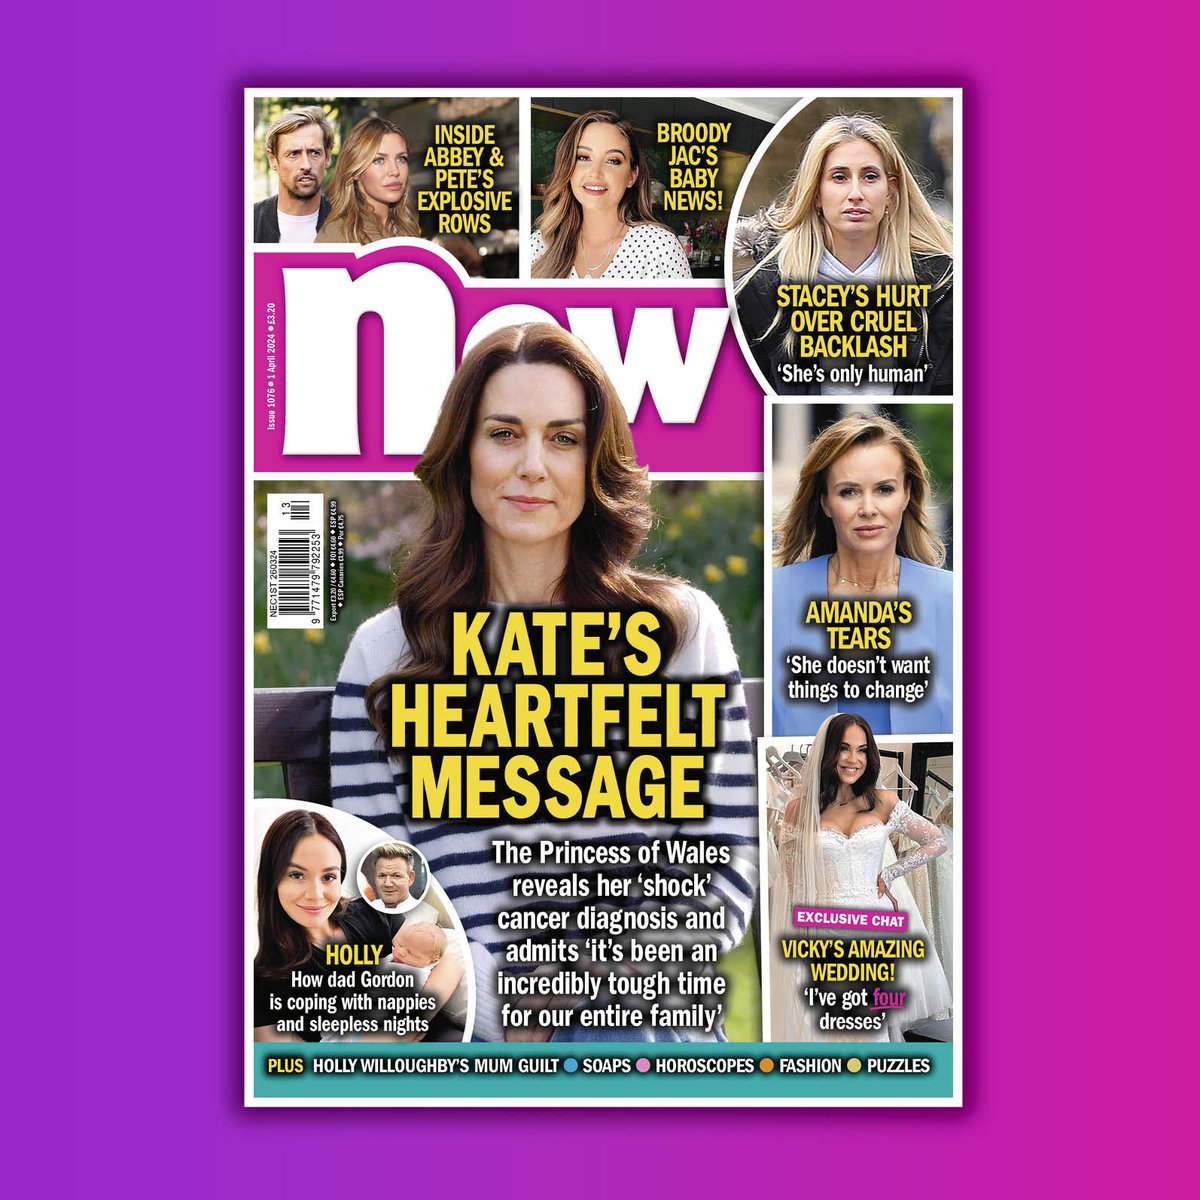 ✨NEW ISSUE ALERT ✨ In this week's issue we've got Kate's heartfelt message. Plus we have Abbey and Pete's explosive rows and Stacey's hurt over cruel backlash. Out now 💥